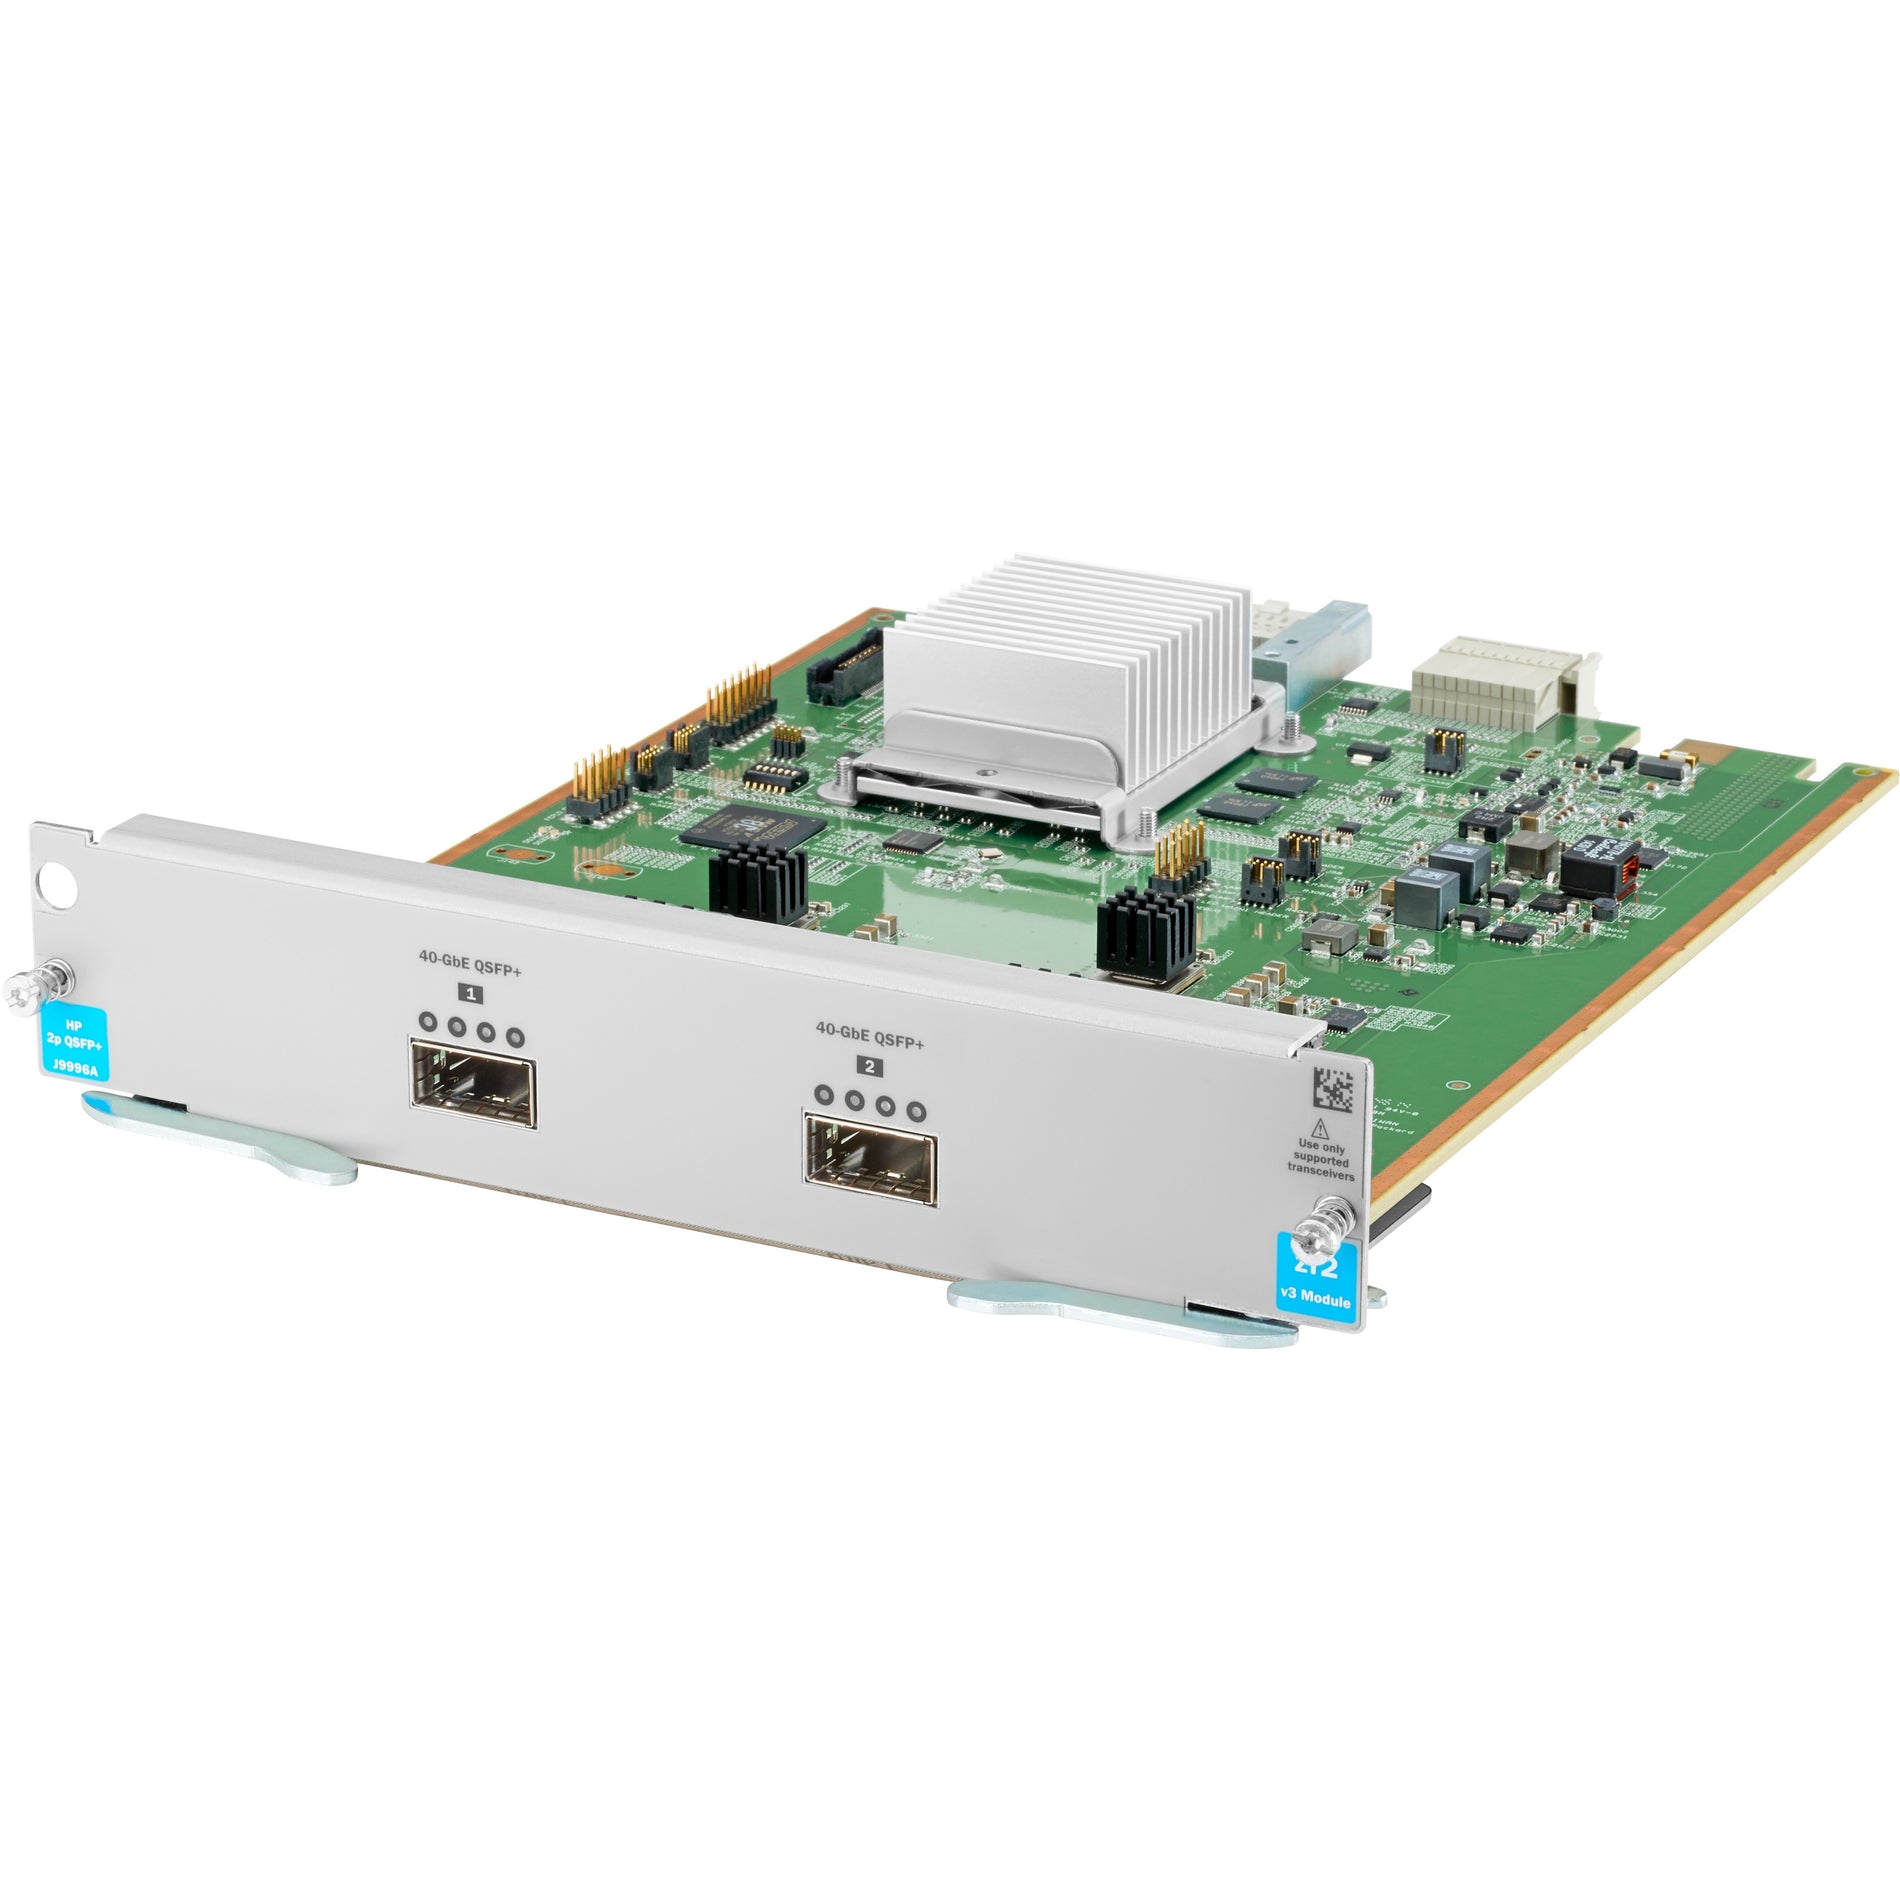 HPE J9996A 2-Port 40GbE QSFP+ v3 zl2 Modul High-Speed Data Networking Solution